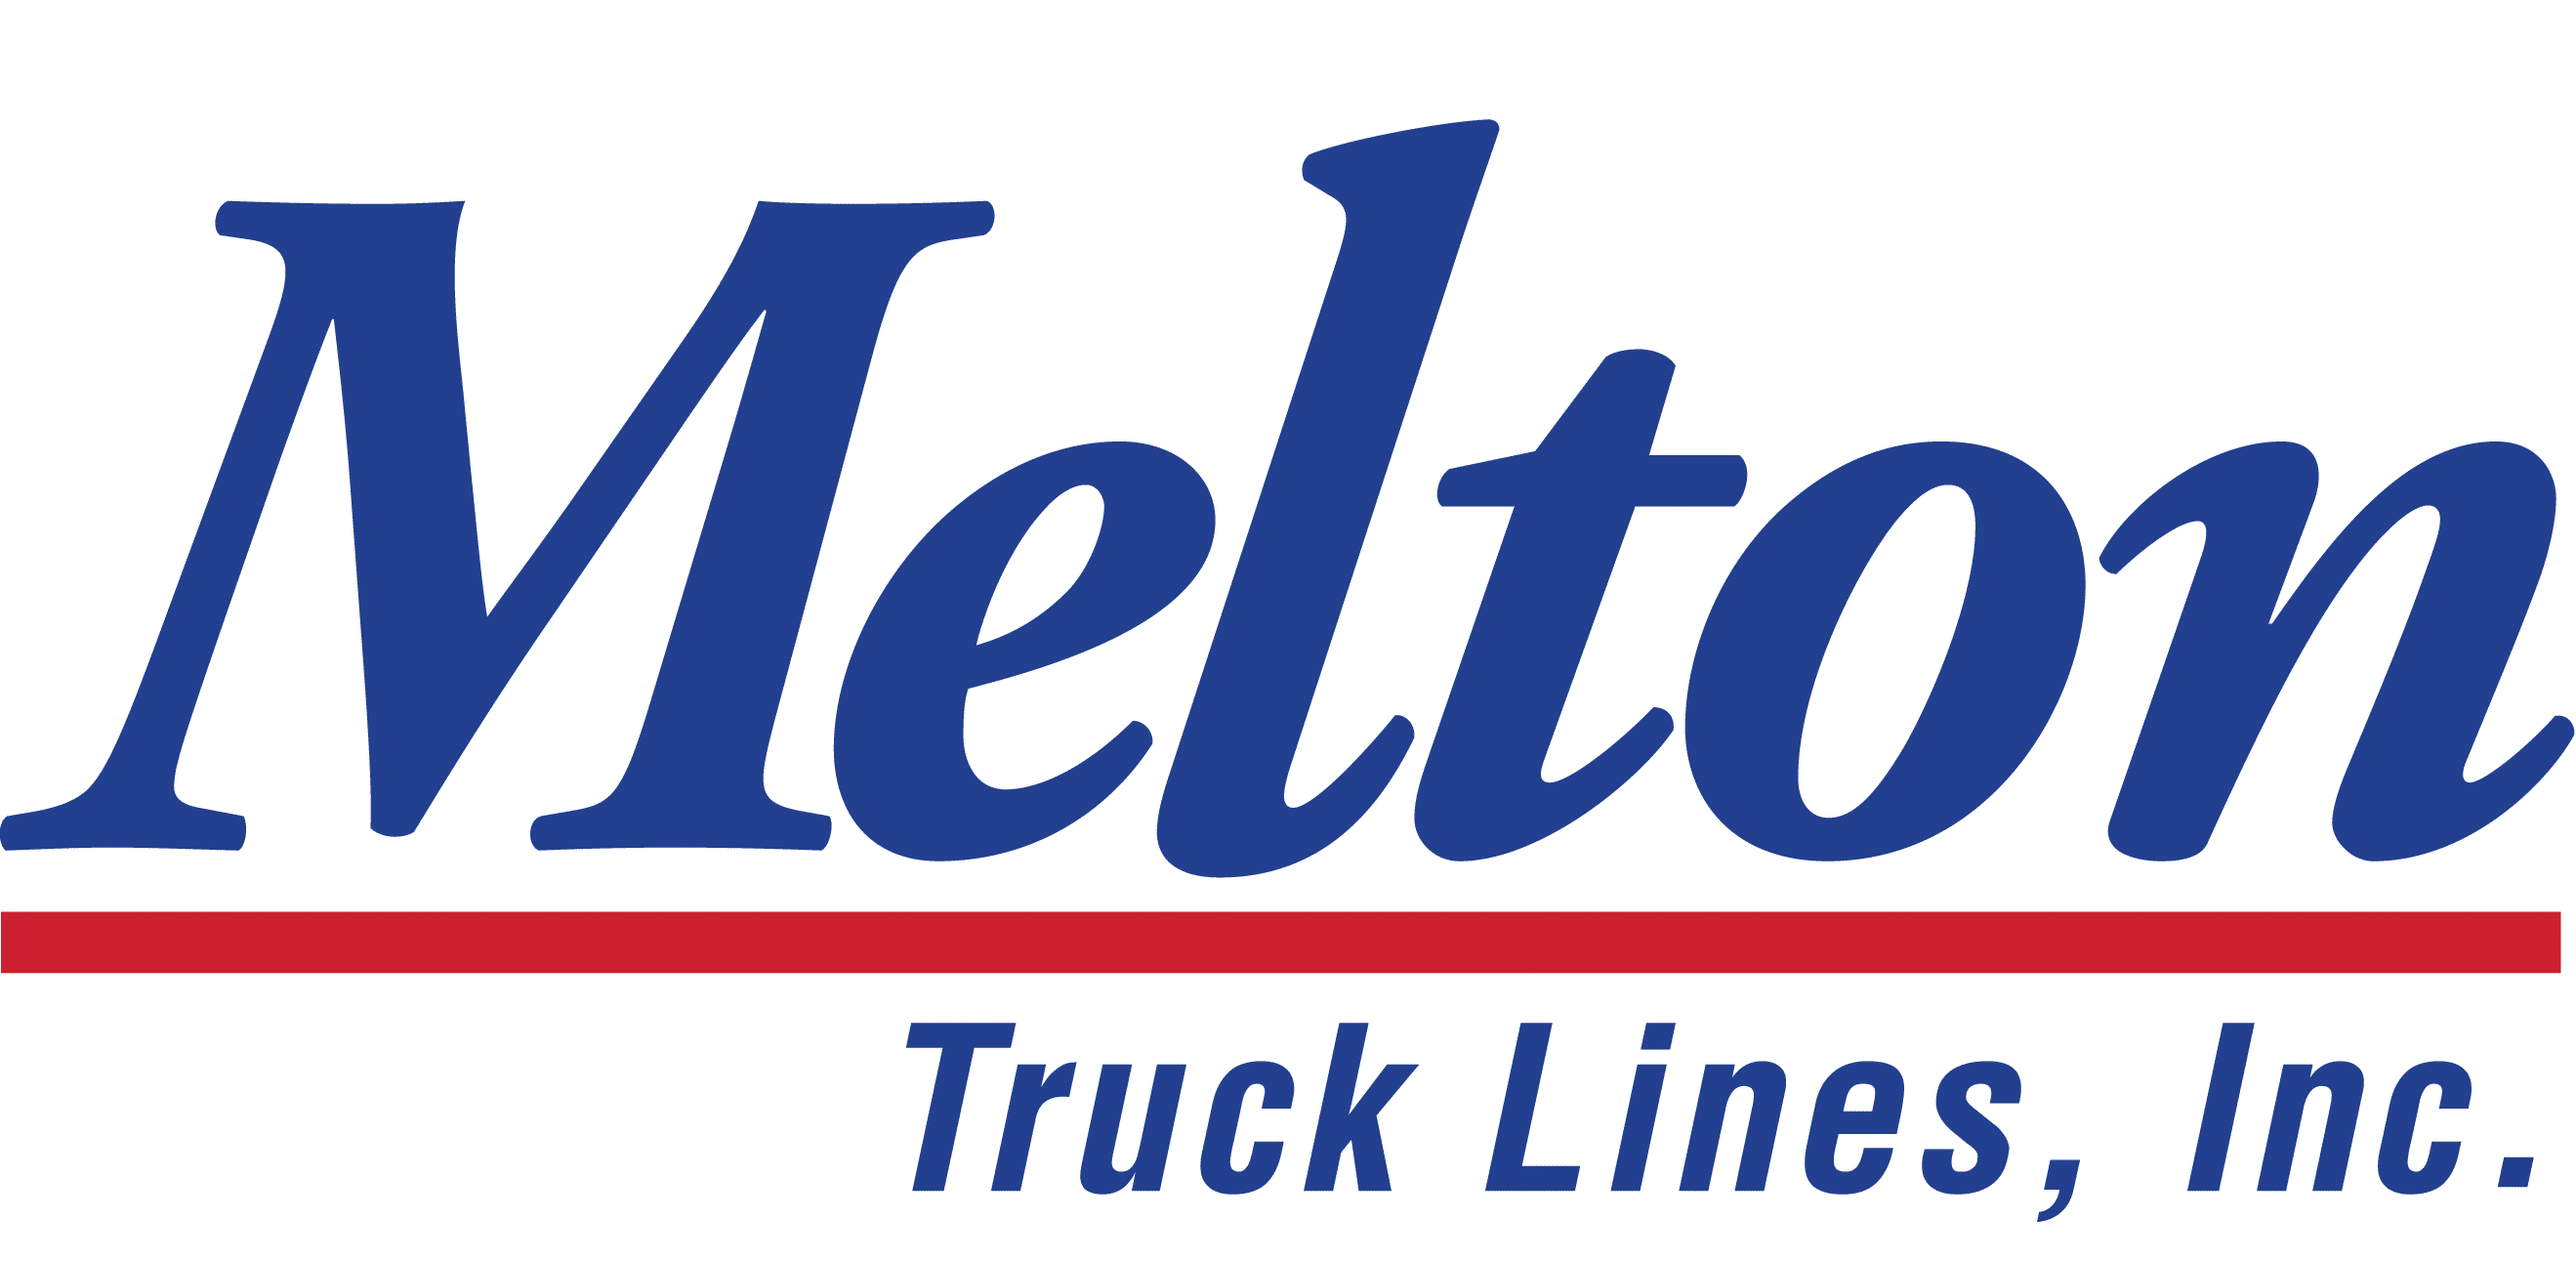 5 Great Gift Ideas for Truck Drivers - Melton Truck Lines, Inc.